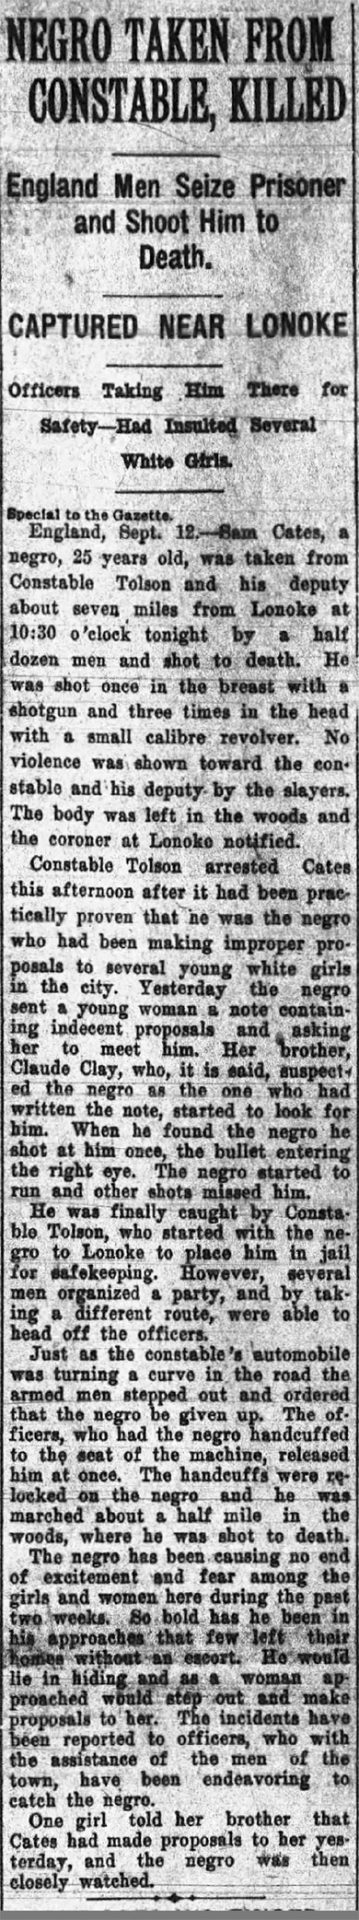 "Negro taken from constable killed" newspaper clipping